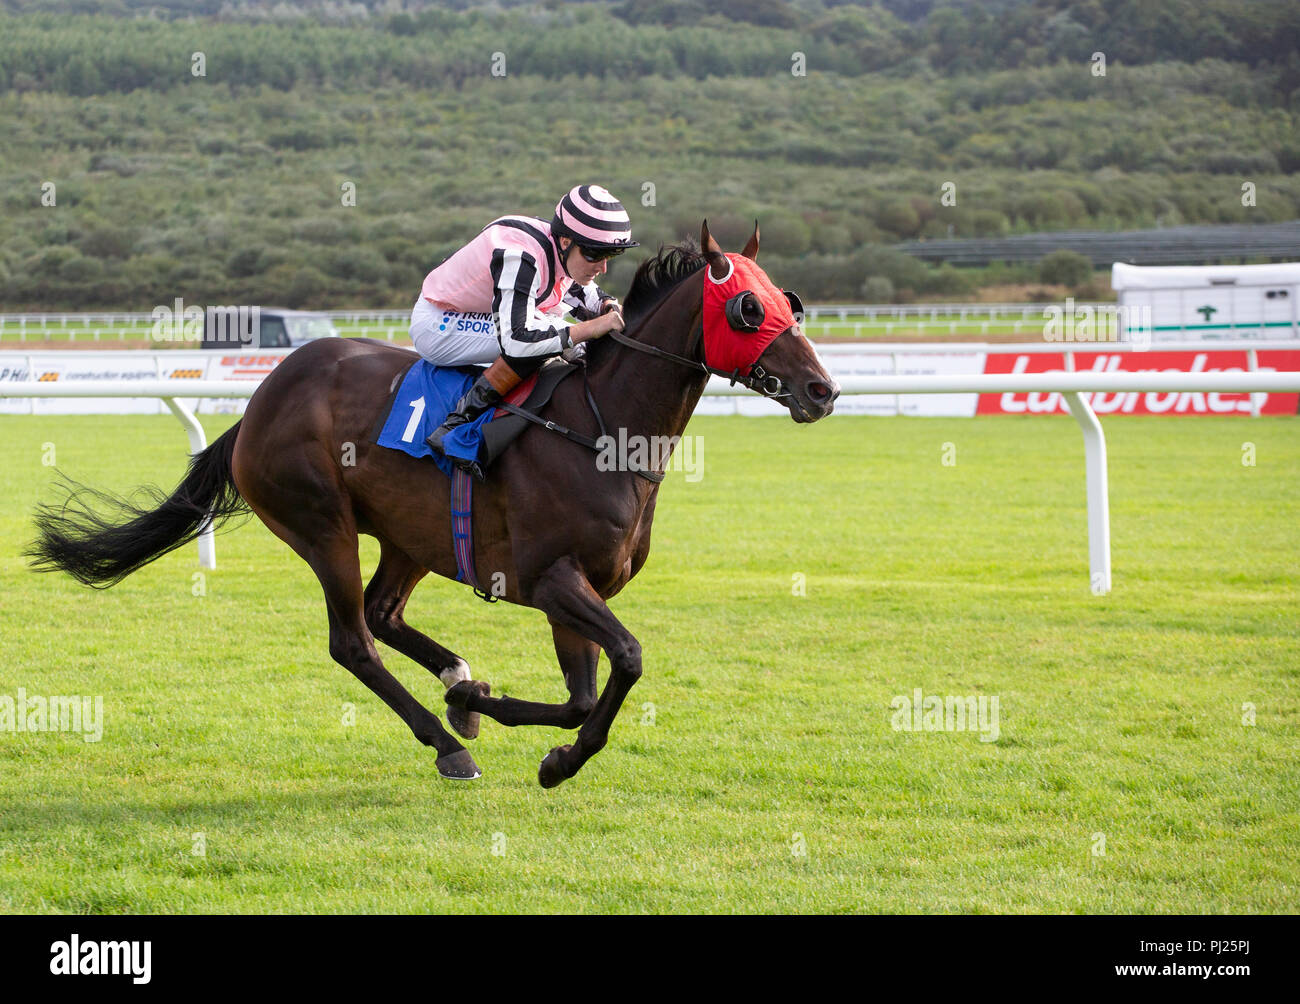 Racehorse Jacbequick ridden by jockey Finley Marsh on the way to winning a race at Ffos Las racecourse Stock Photo